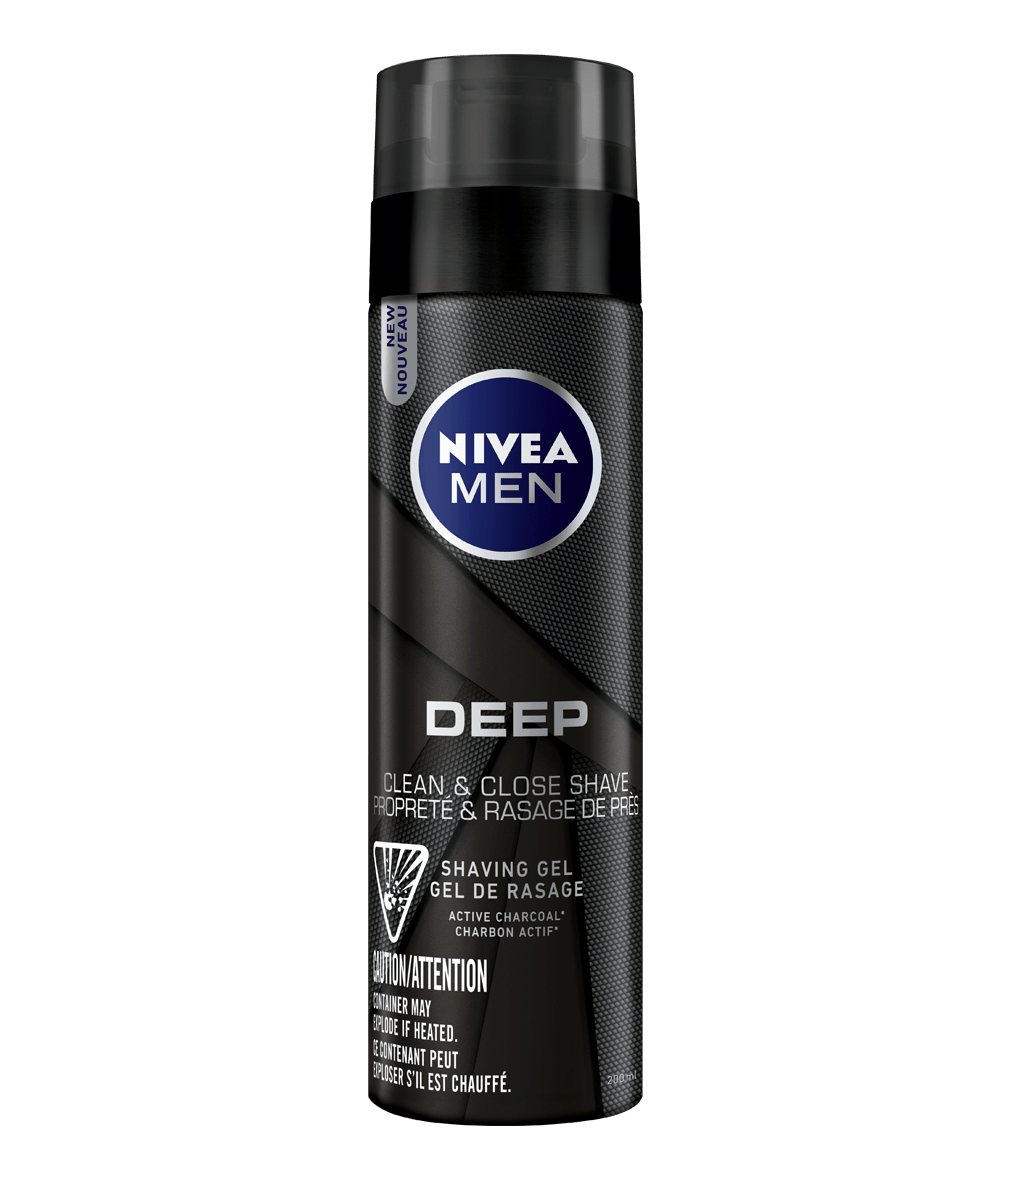 DEEP Shaving Gel with Active Charcoal